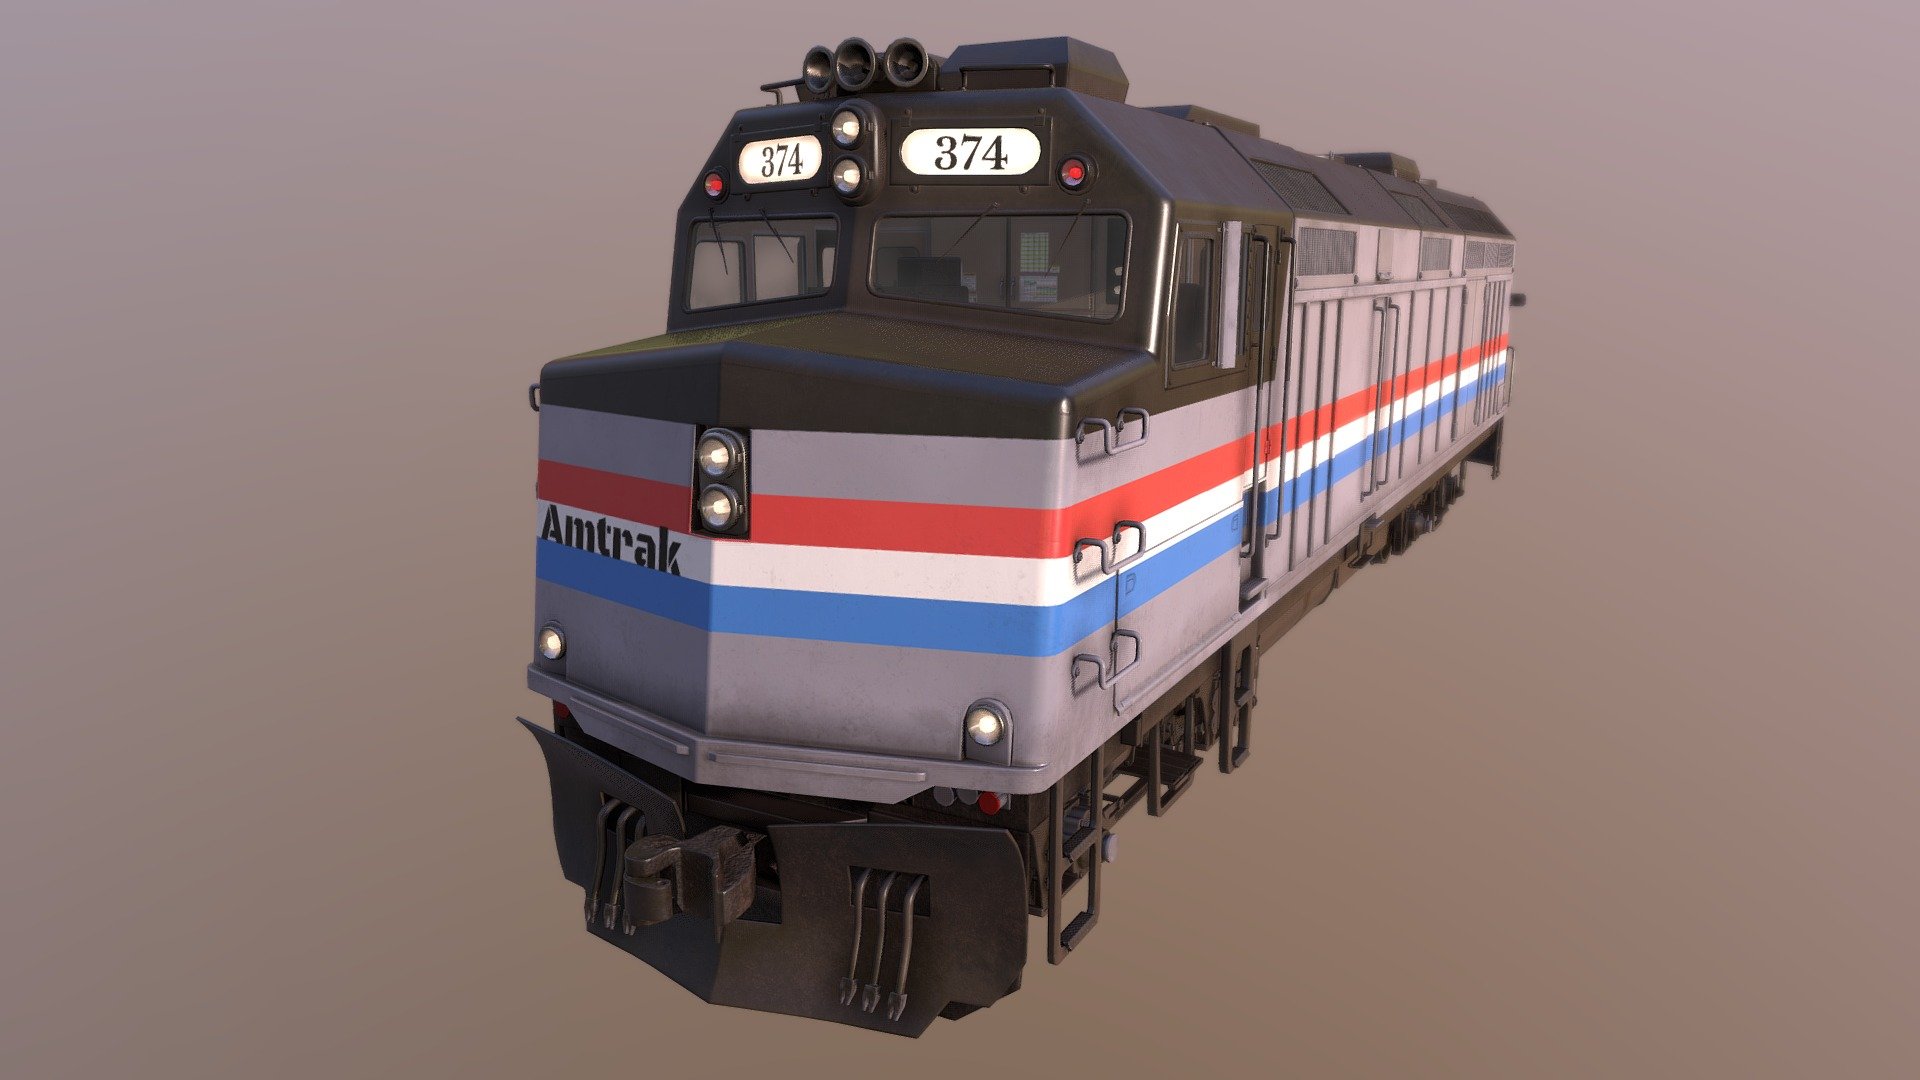 Realistic Train with simulator quality interior, higly detailed 4k textures. 
Check this out on Asset Store under Realistic Train HQ. Package suitable for PC games and visualizations! - Realistic Train HQ - 3D model by PADDINGSONS Outsourcing (@Paddingsons) 3d model